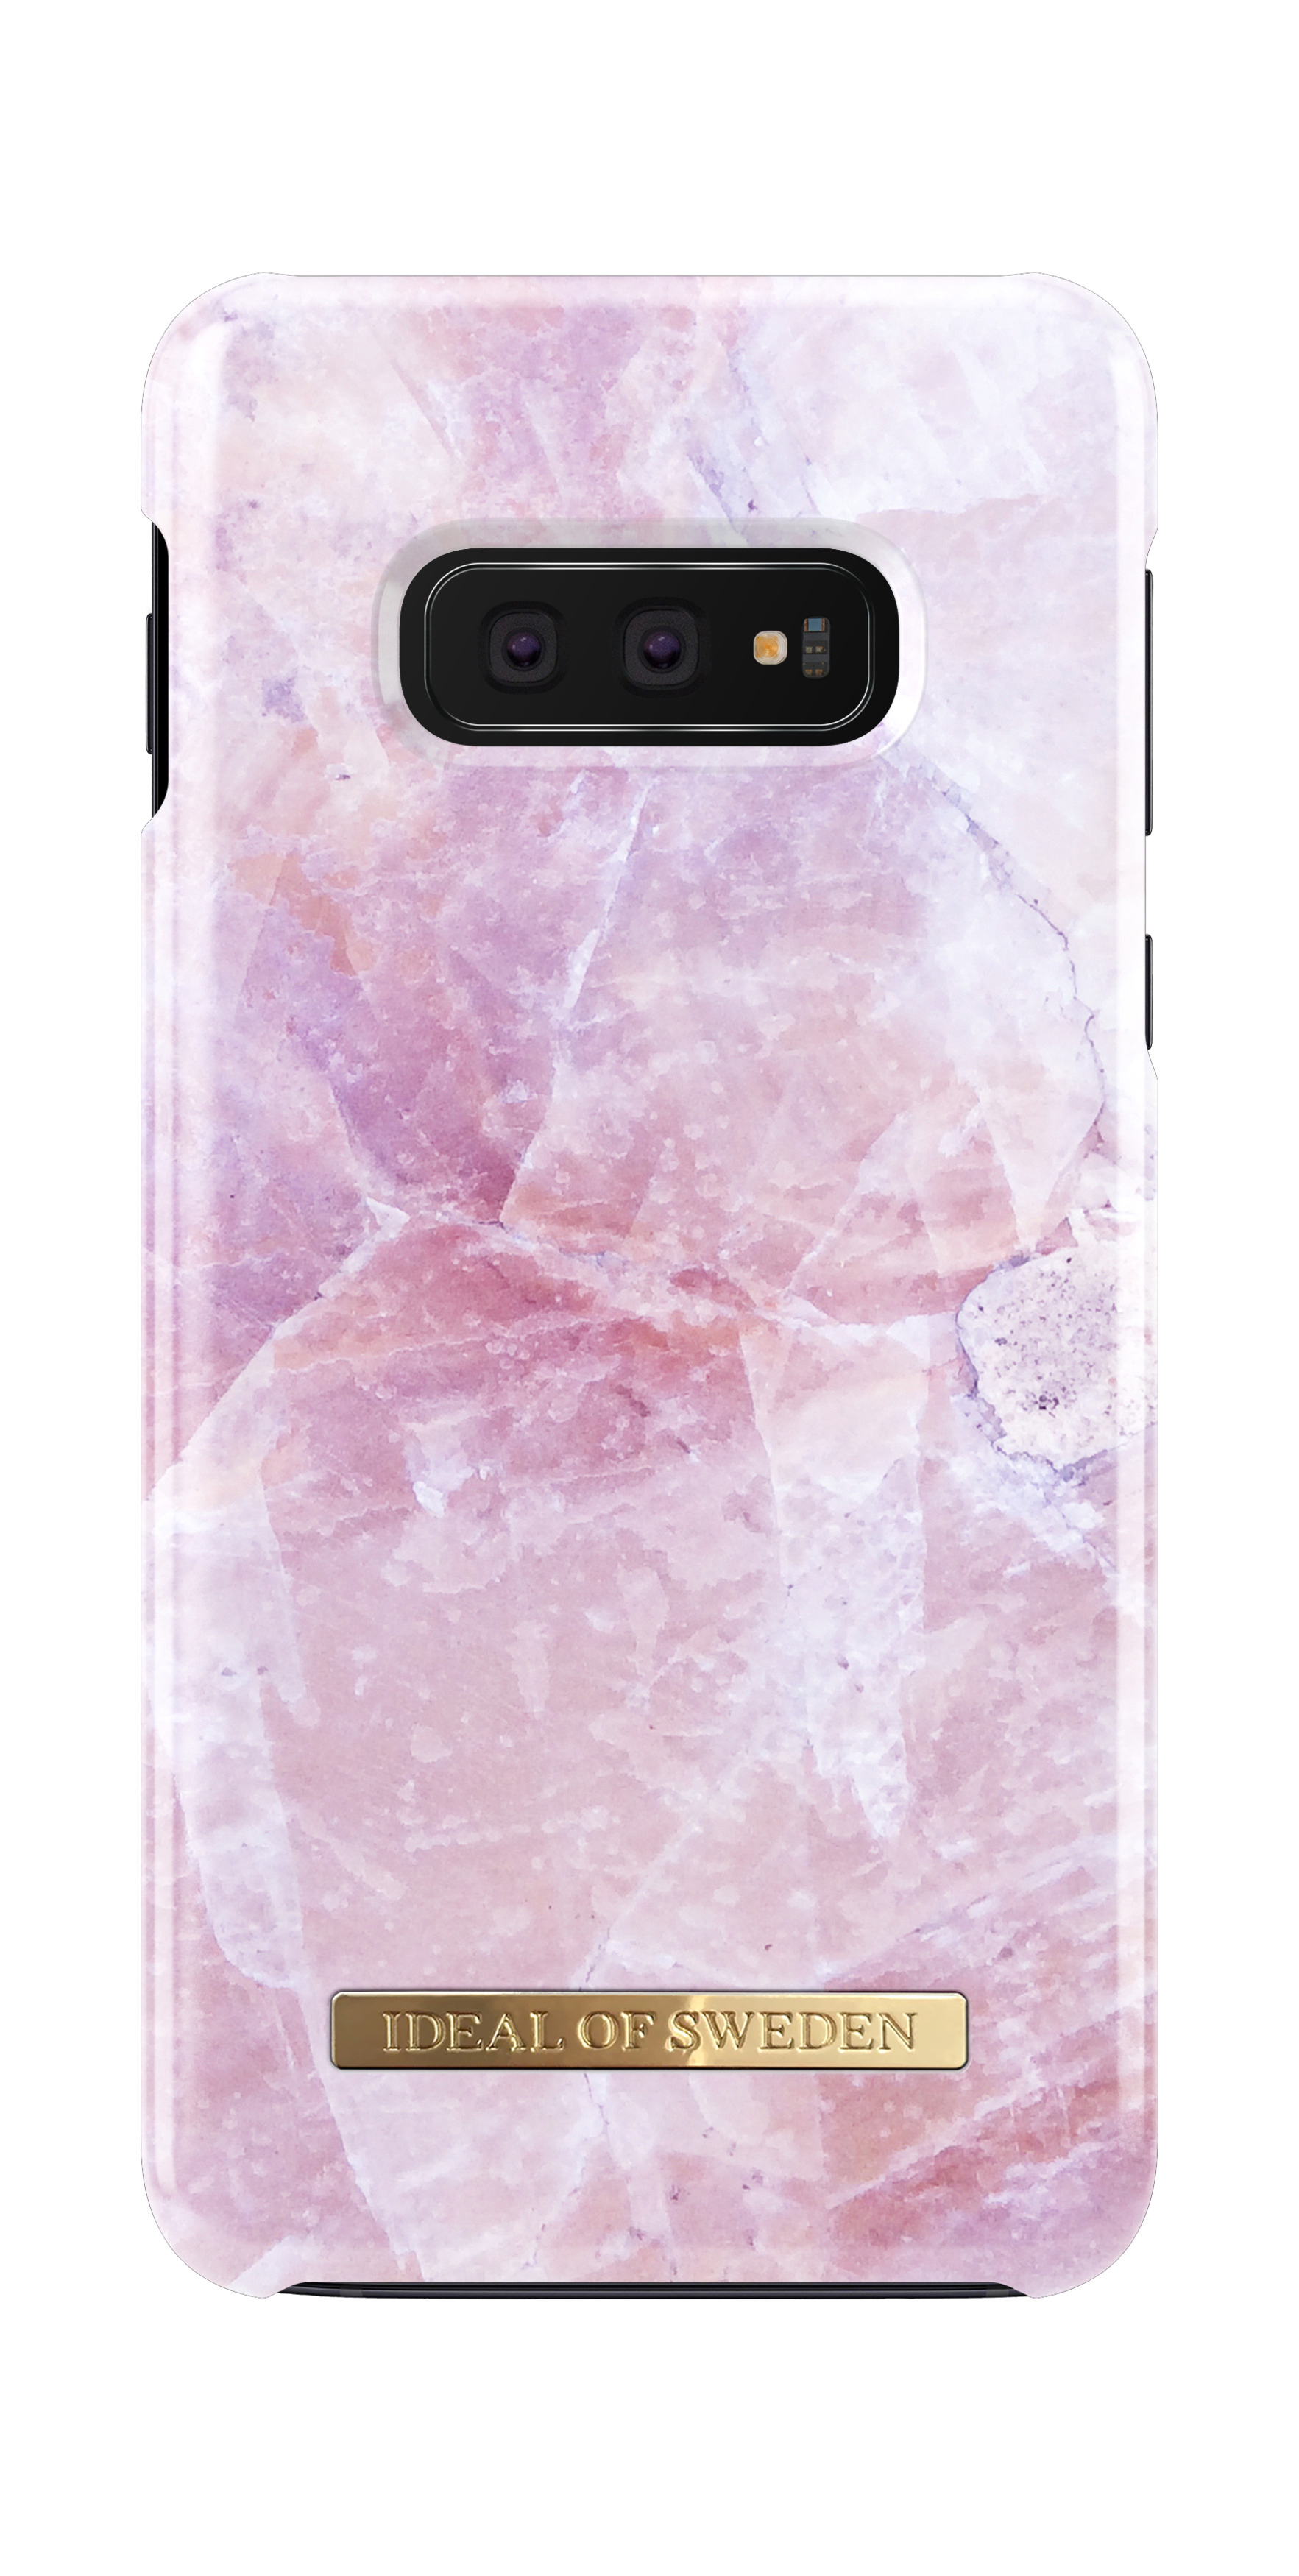 Fashion, Roses SWEDEN Galaxy Samsung, S10e, Backcover, Antique IDEAL OF